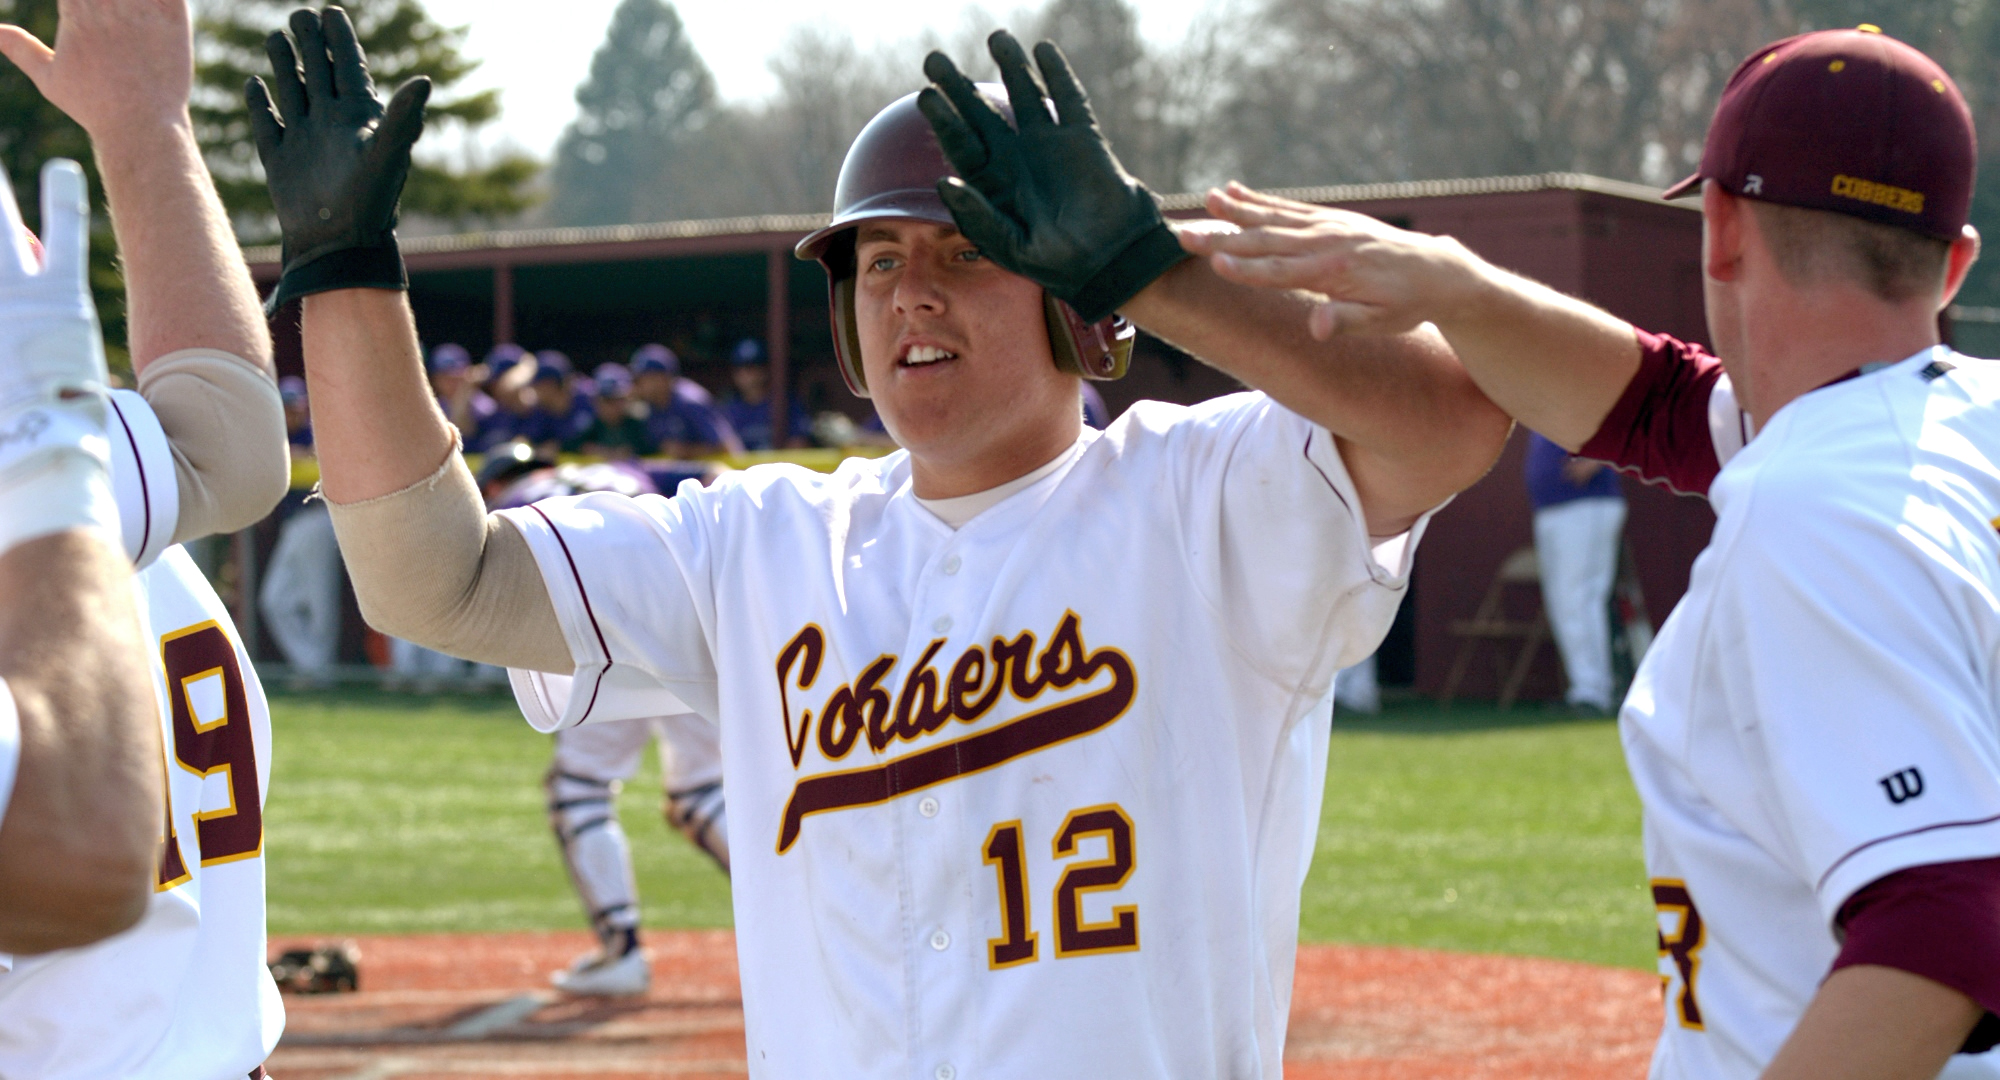 Junior Nate Leintz had a walkoff grand slam in the first game and then the game-tying single in the bottom of the ninth in the second game in the Cobbers' sweep over Augsburg. Both hits came with two outs and two strikes.